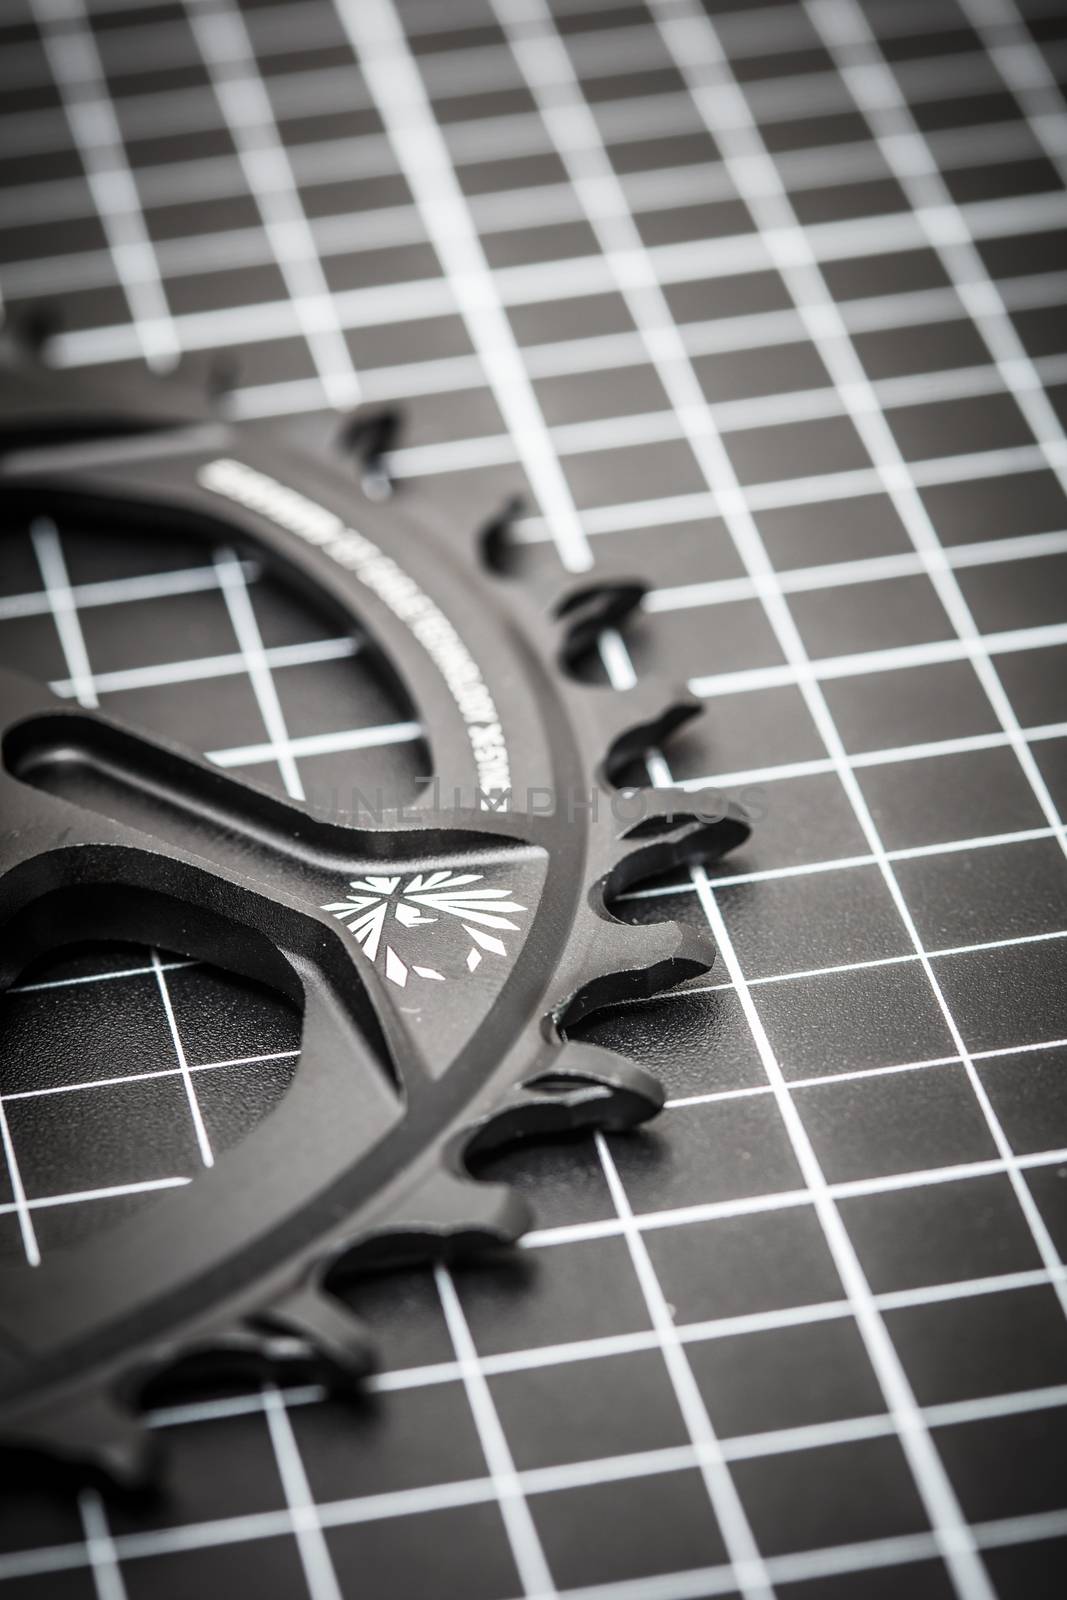 A bicycle front chainring ready to be installed onto a mountain bike